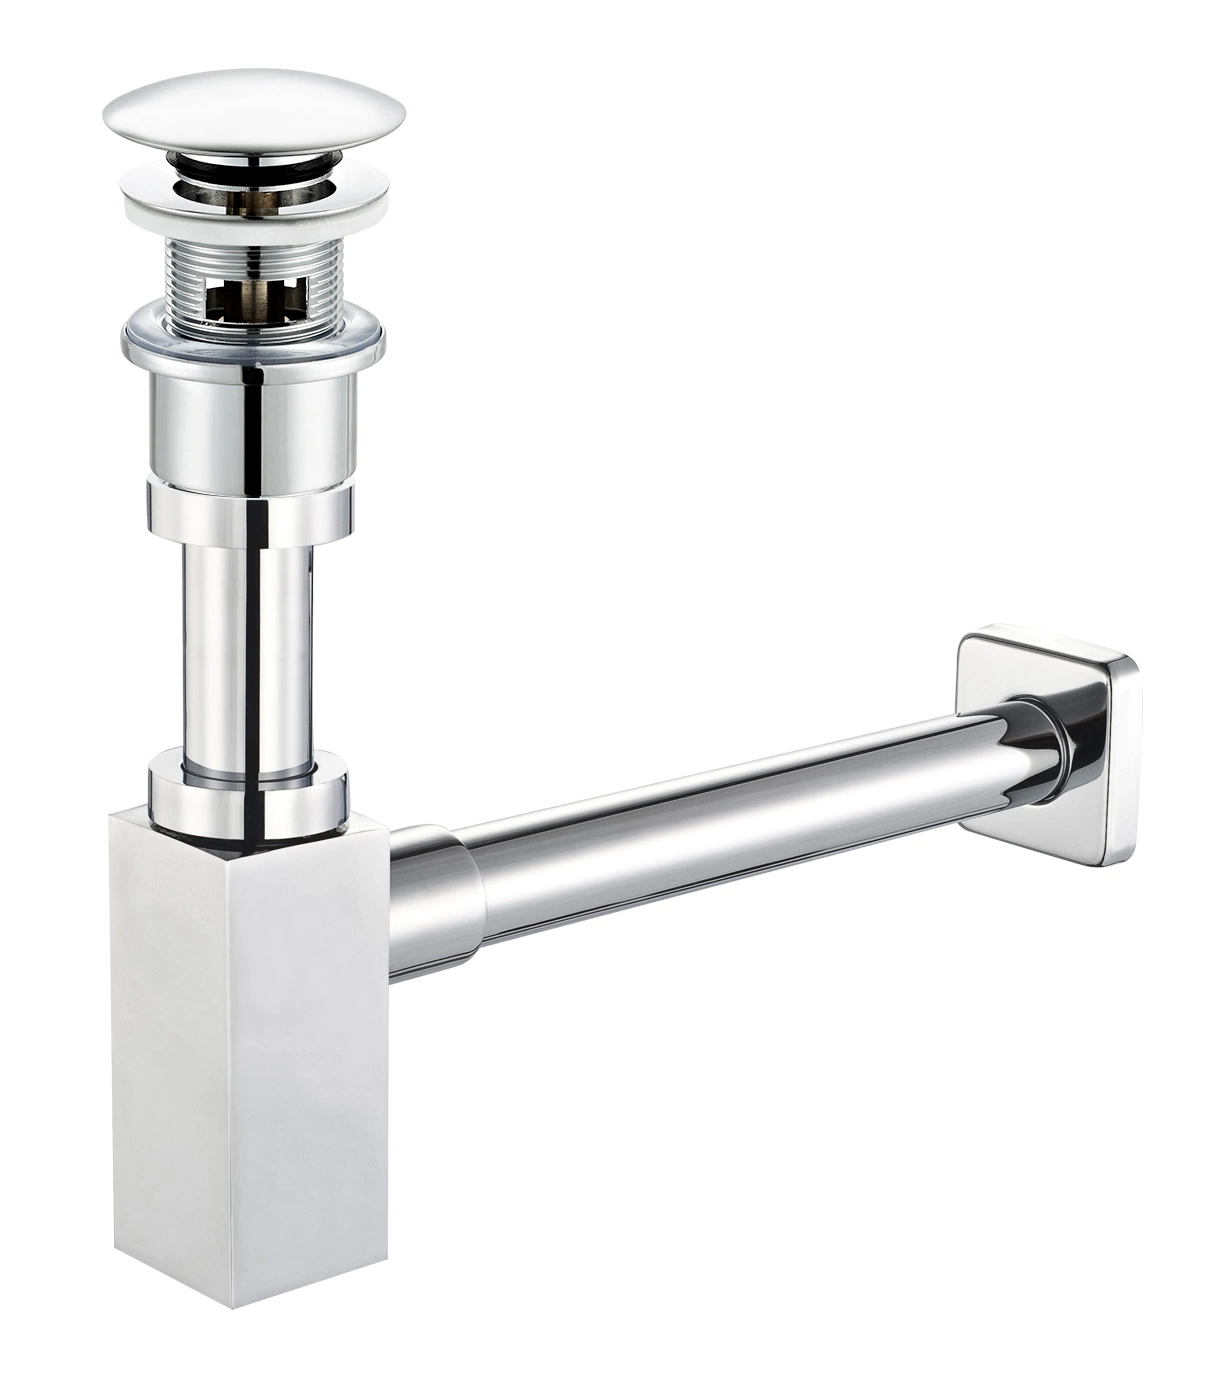 Bathroom Fittings: Pop-up Waste and Versatile Sink Drain with Bottle Trap